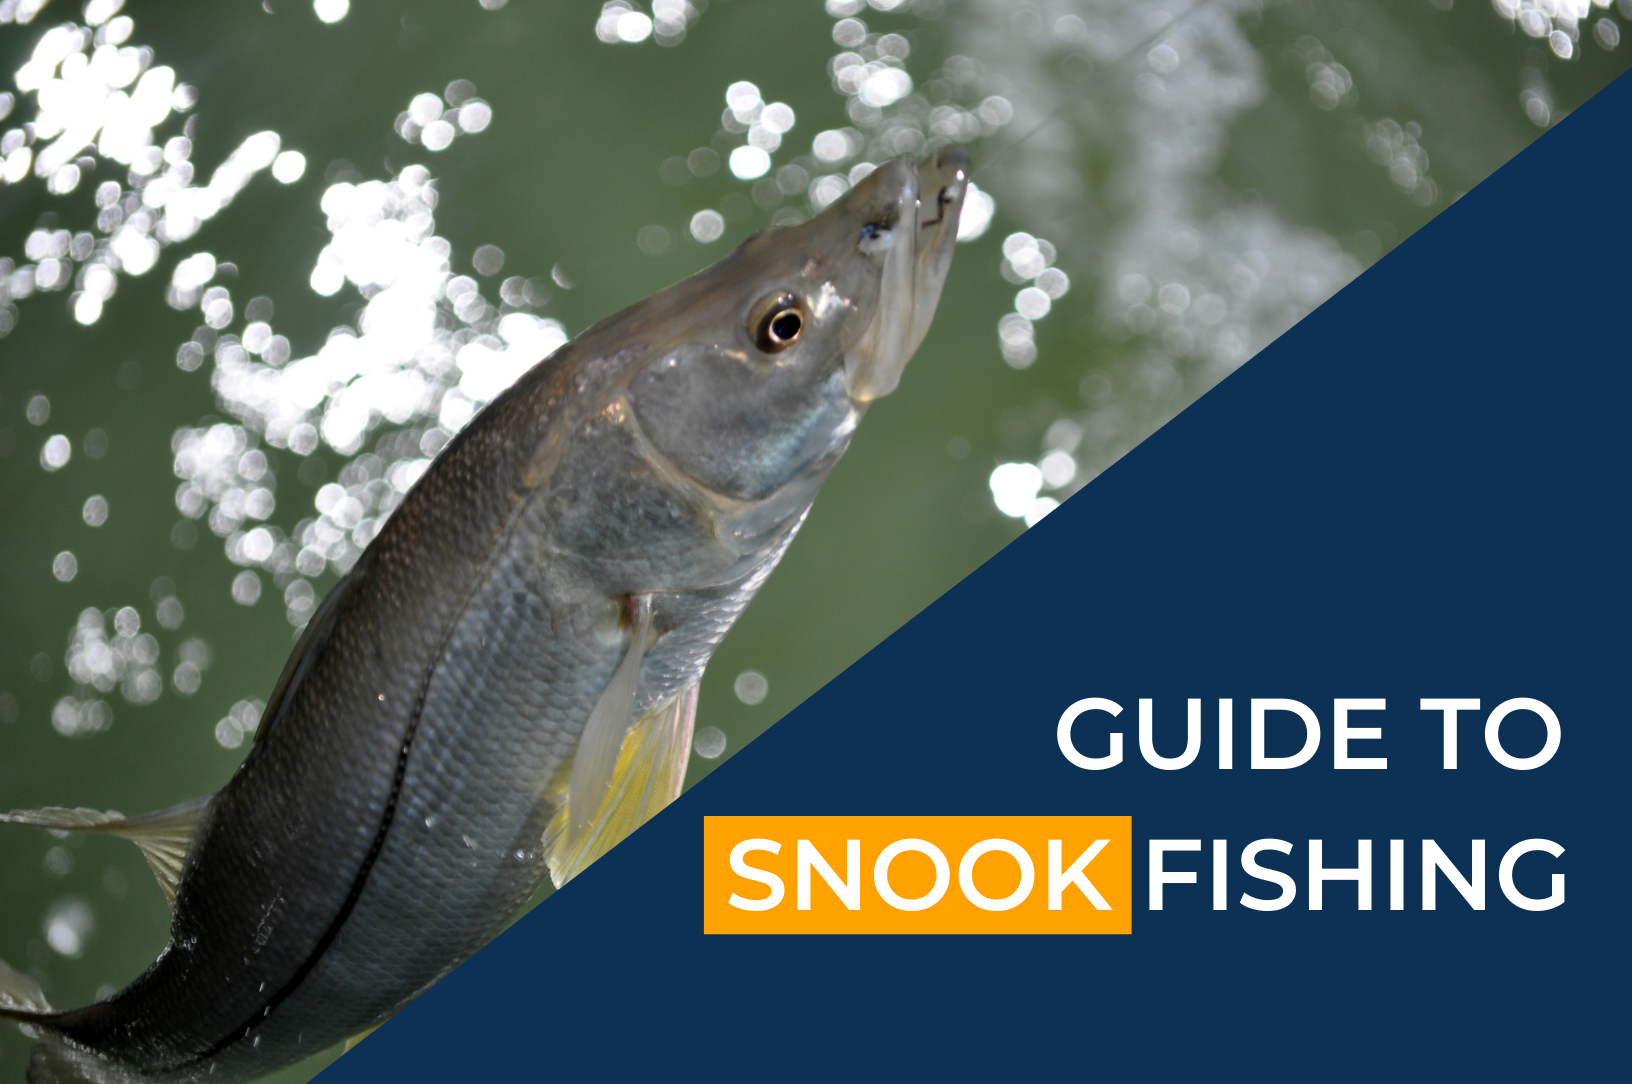 Snook fishing guide